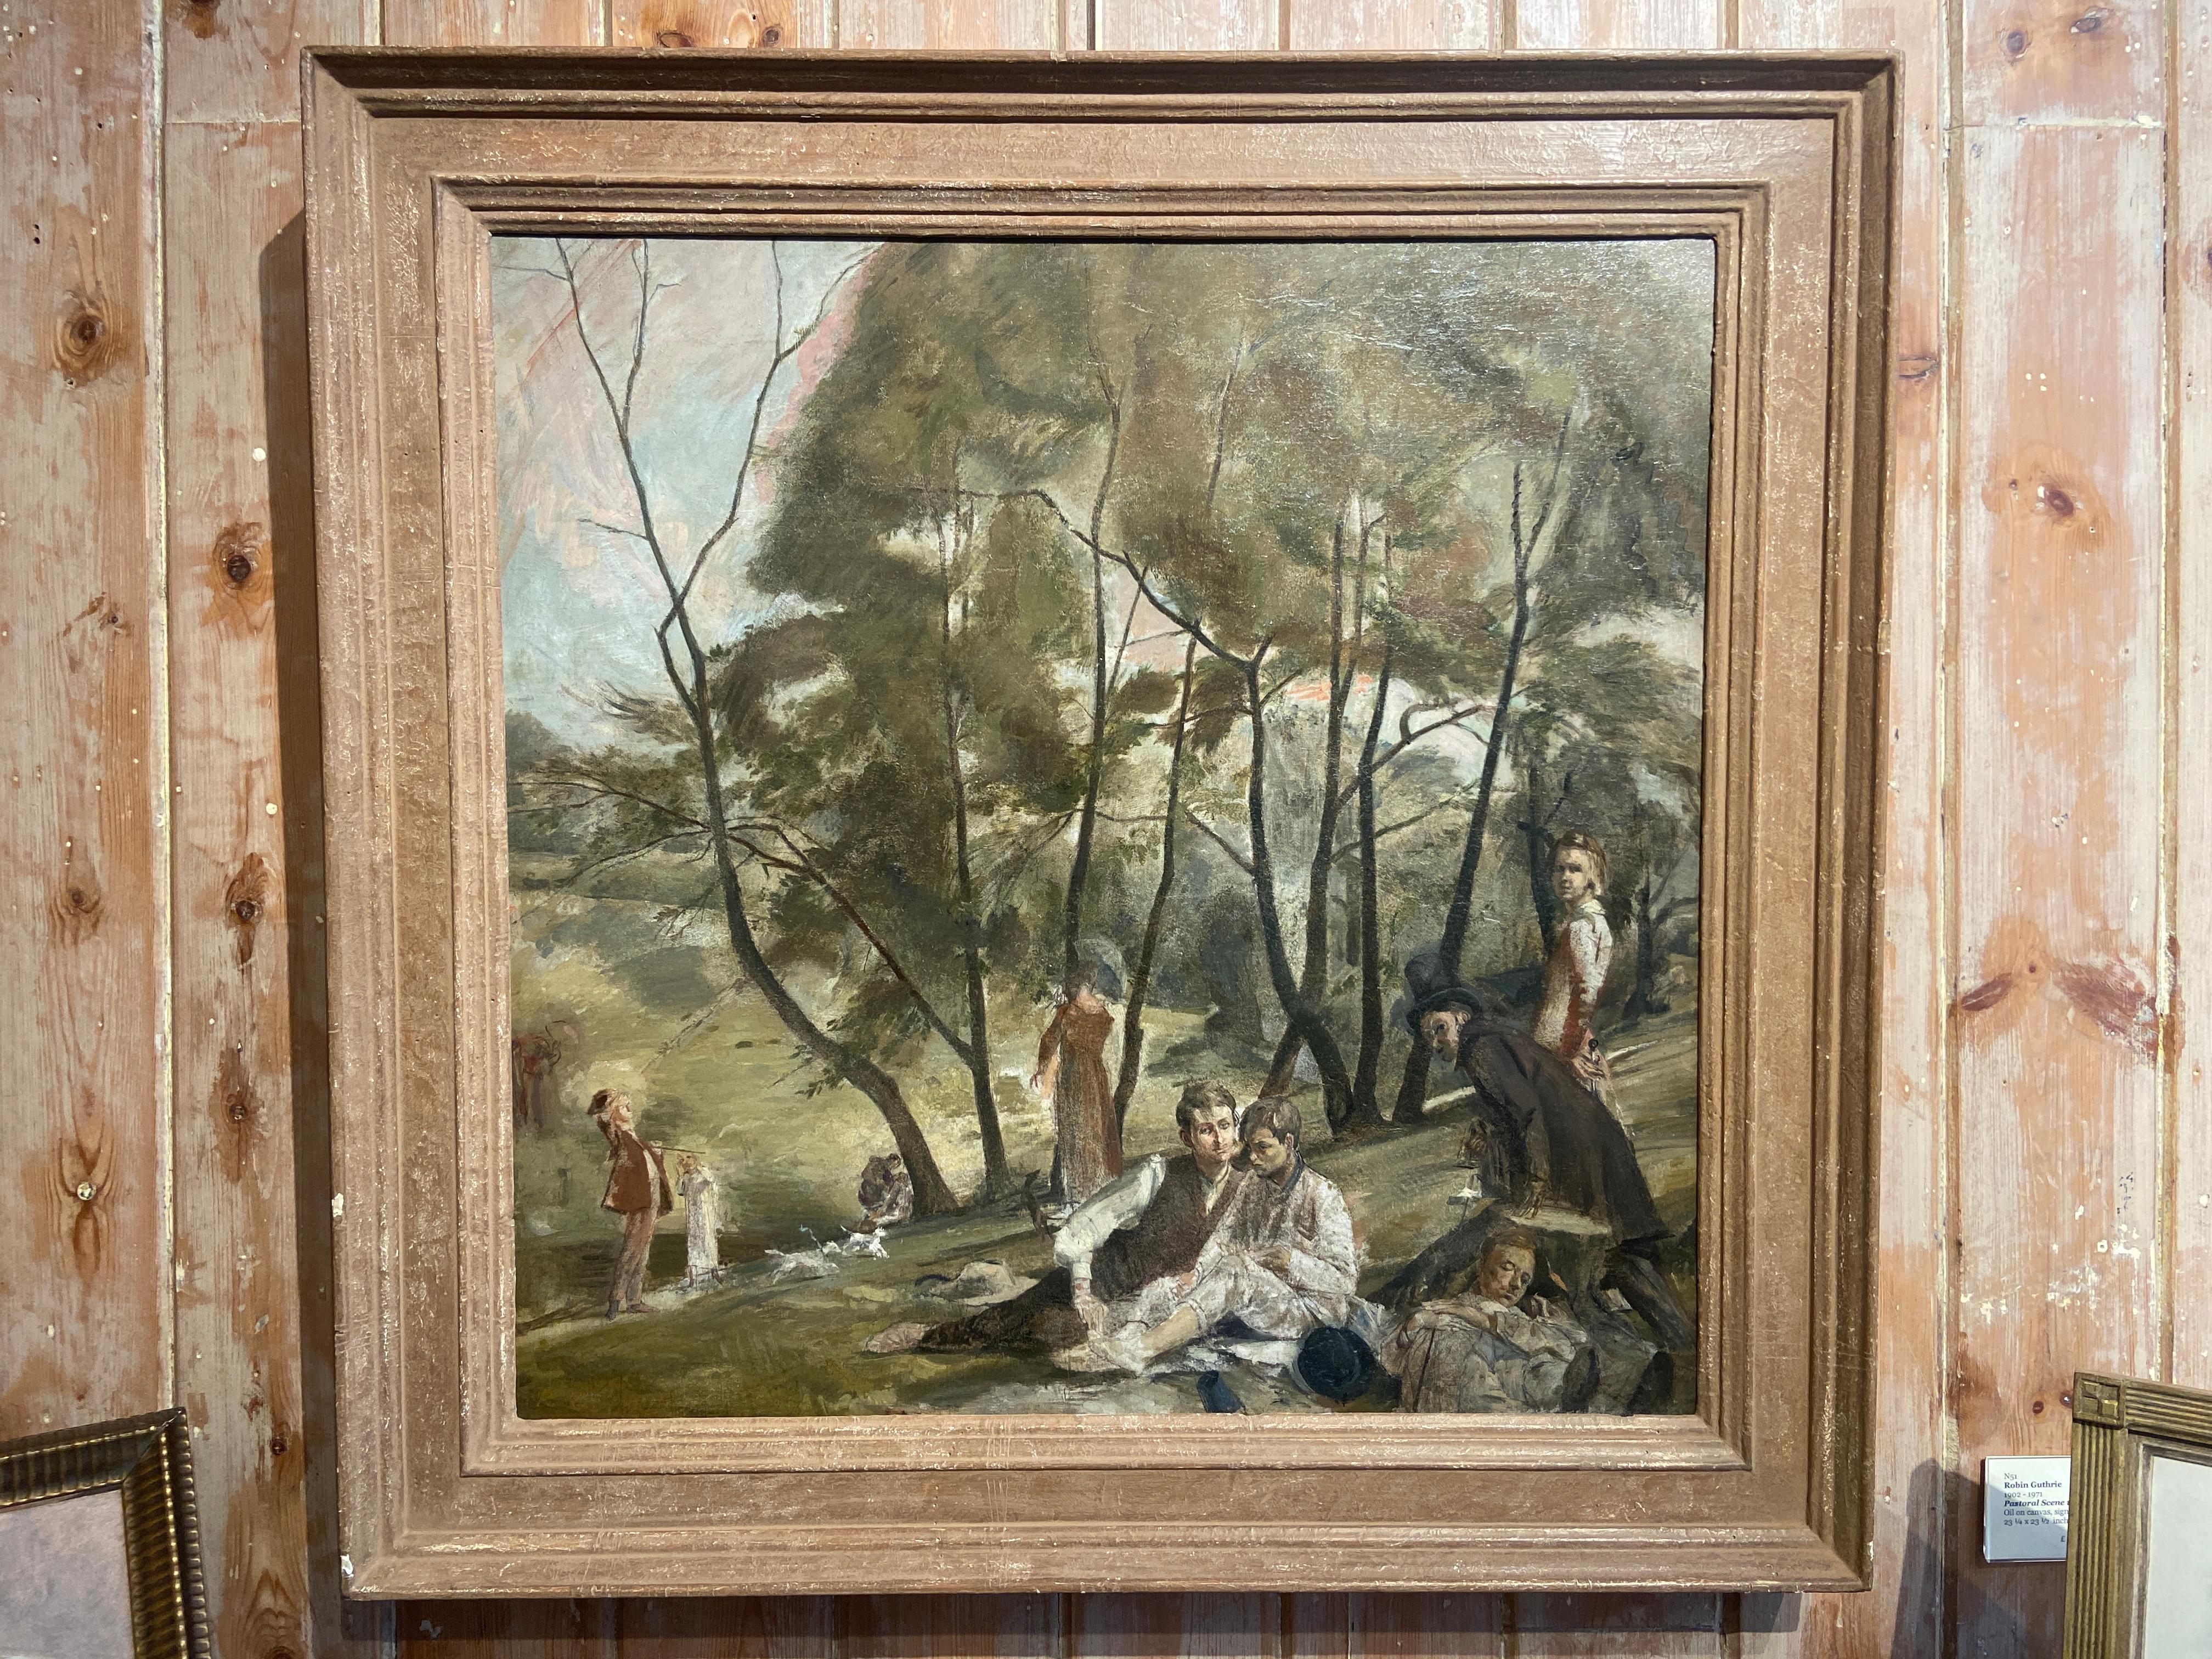 Oil on canvas, signed lower left
Image size: 23 1/4 x 23 1/2 inches (59 x 60 cm)
Hand made contemporary style frame

This exciting newly discovered work by Guthrie is quite a rarity. Showing a figure seated looking at us is almost certainly a self